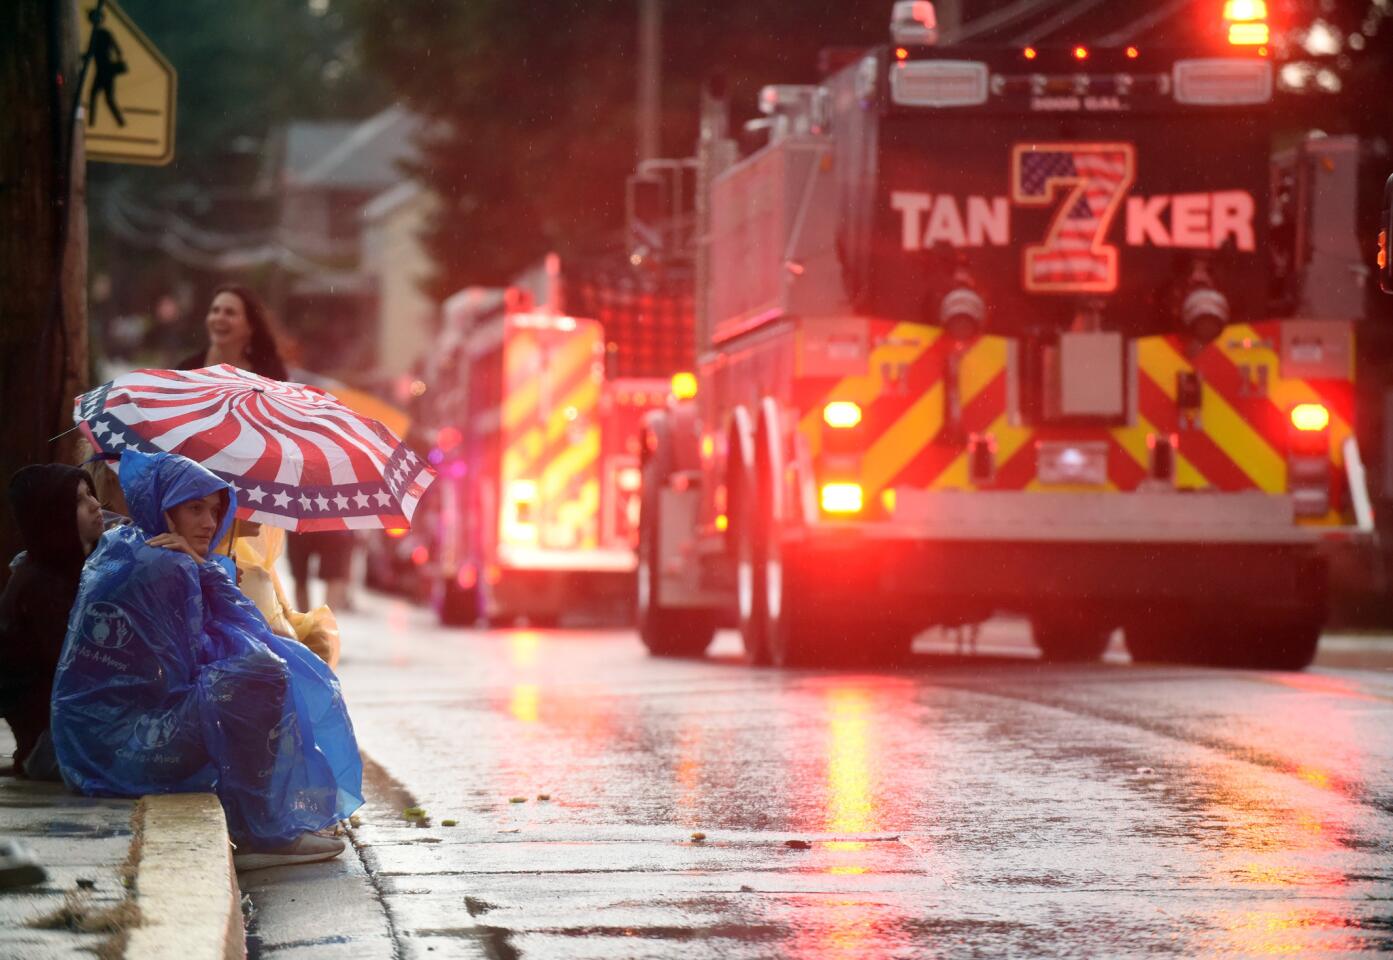 Spectators try to stay dry as they watch the parade from the safety of umbrellas and ponchos during the Manchester Volunteer Fire Company carnvial on Tuesday, July 2.